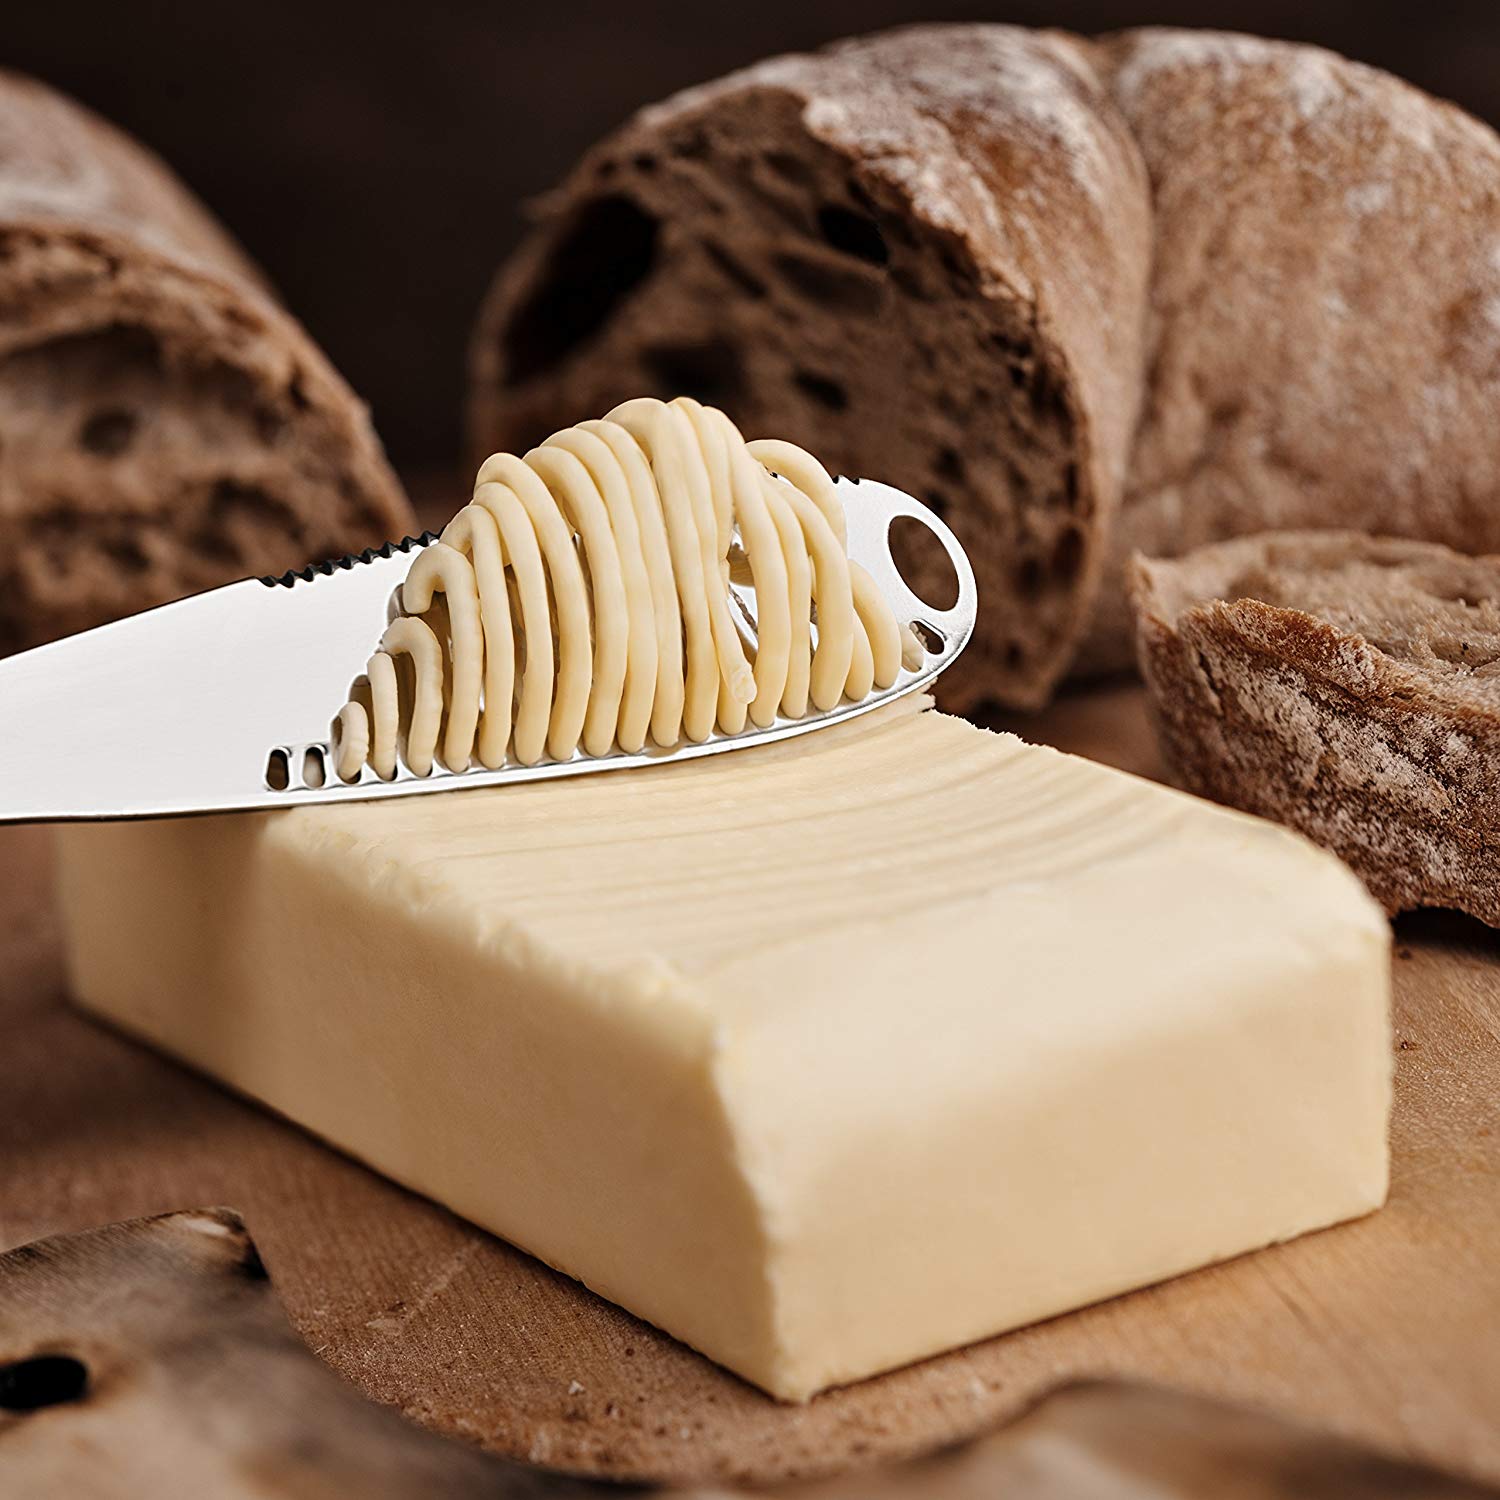 This Butter Knife Will Help You Make Perfect Toast Every Single Time